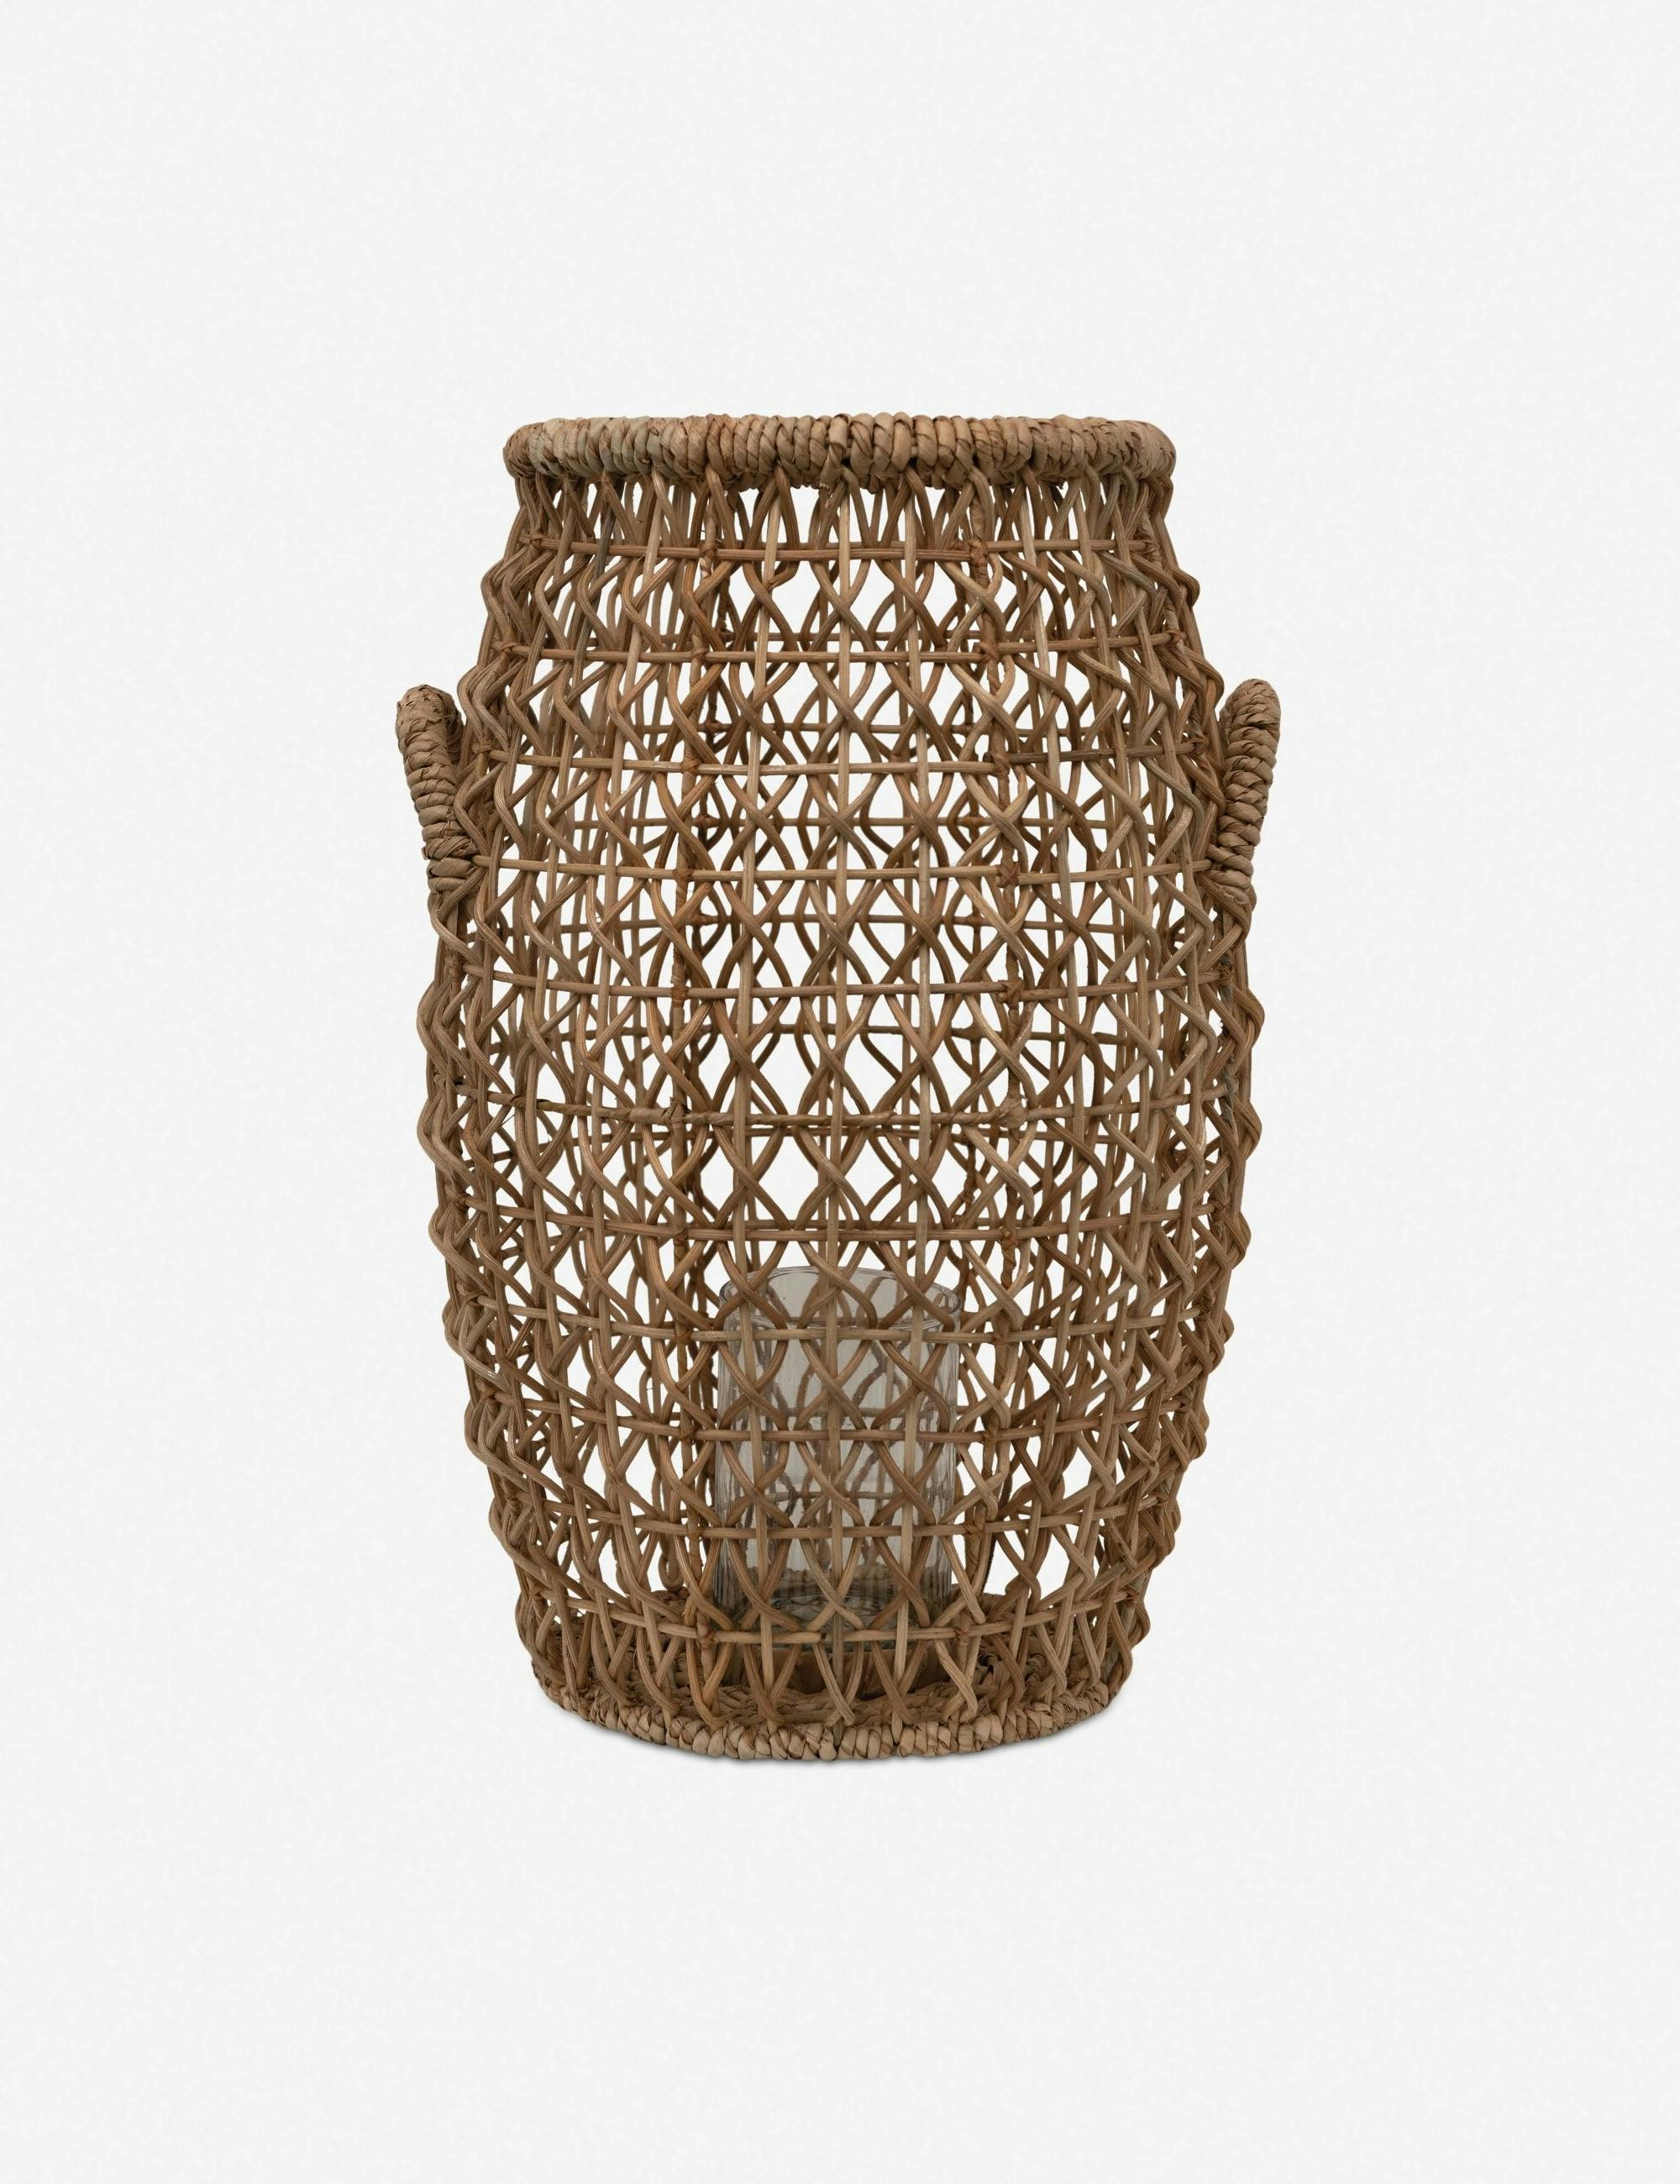 Elysian 26'' Hand-Woven Rattan & Water Hyacinth Candle Lantern with Glass Insert